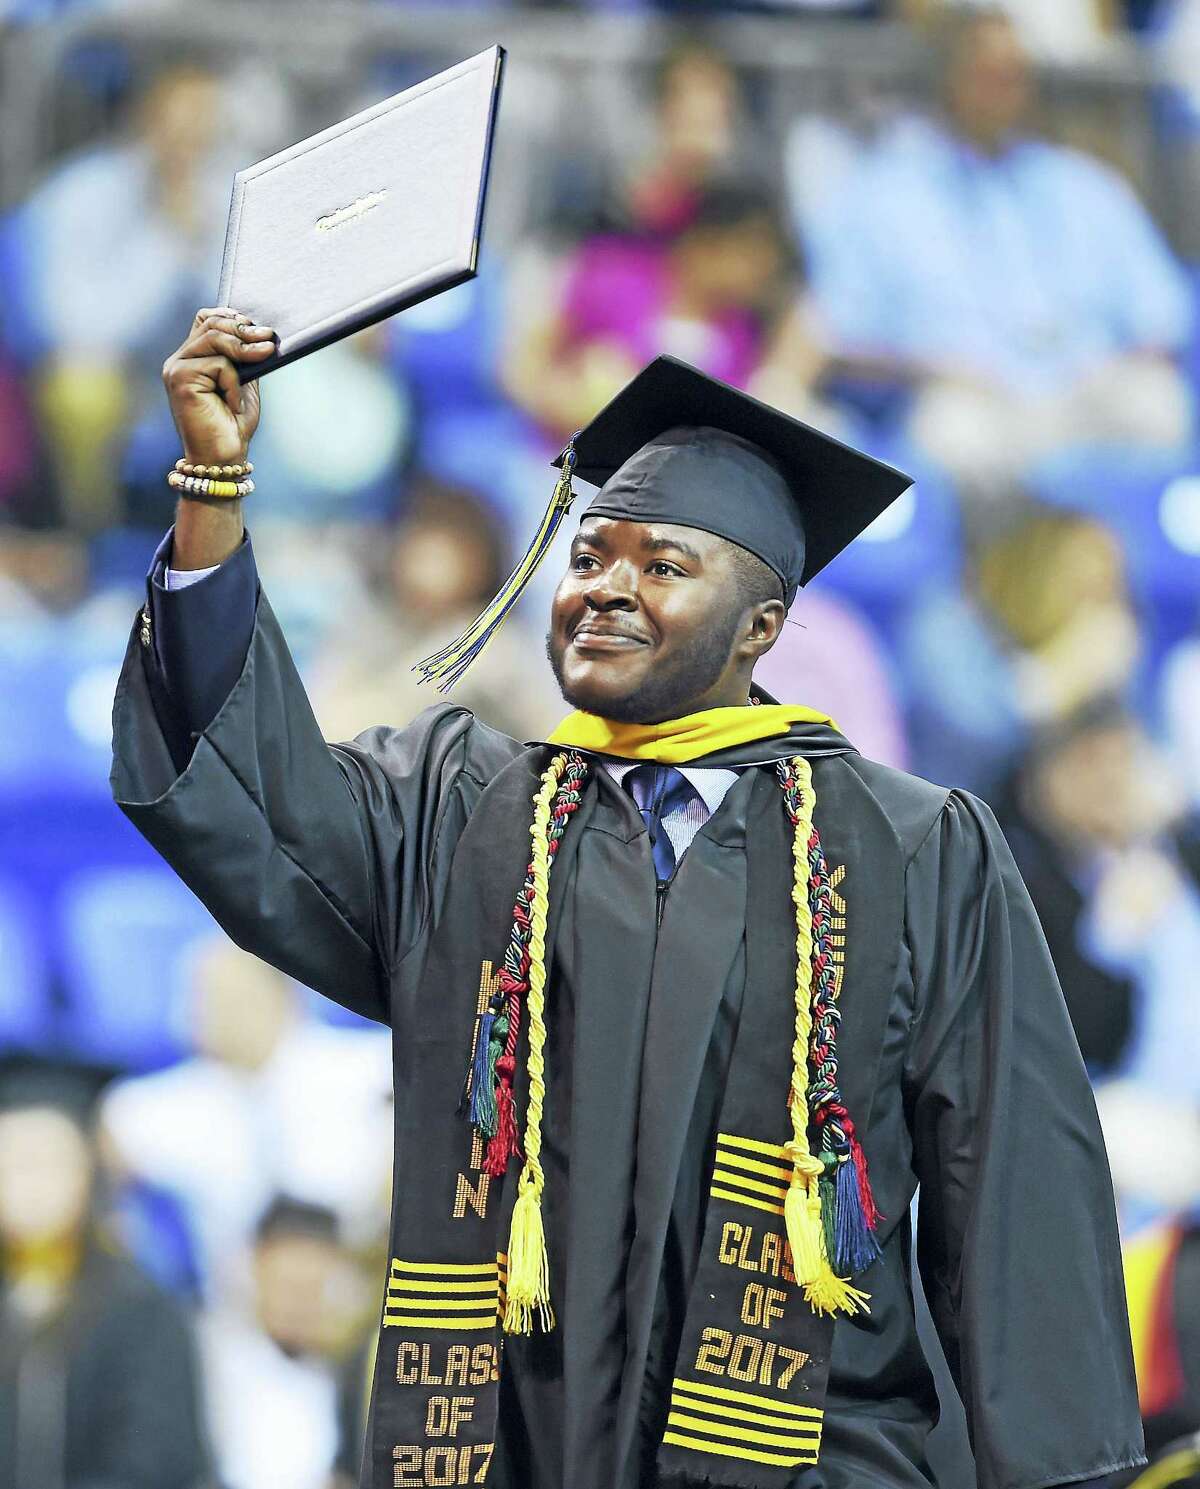 Kevin Otchere shows off his diploma at commencement exercises for Quinnipiac University’s College of Arts and Sciences at the TD Bank Sports Center in Hamden on 5/20/2017. Otchere graduated Magna Cum Laude with a Bachelor of Science degree.